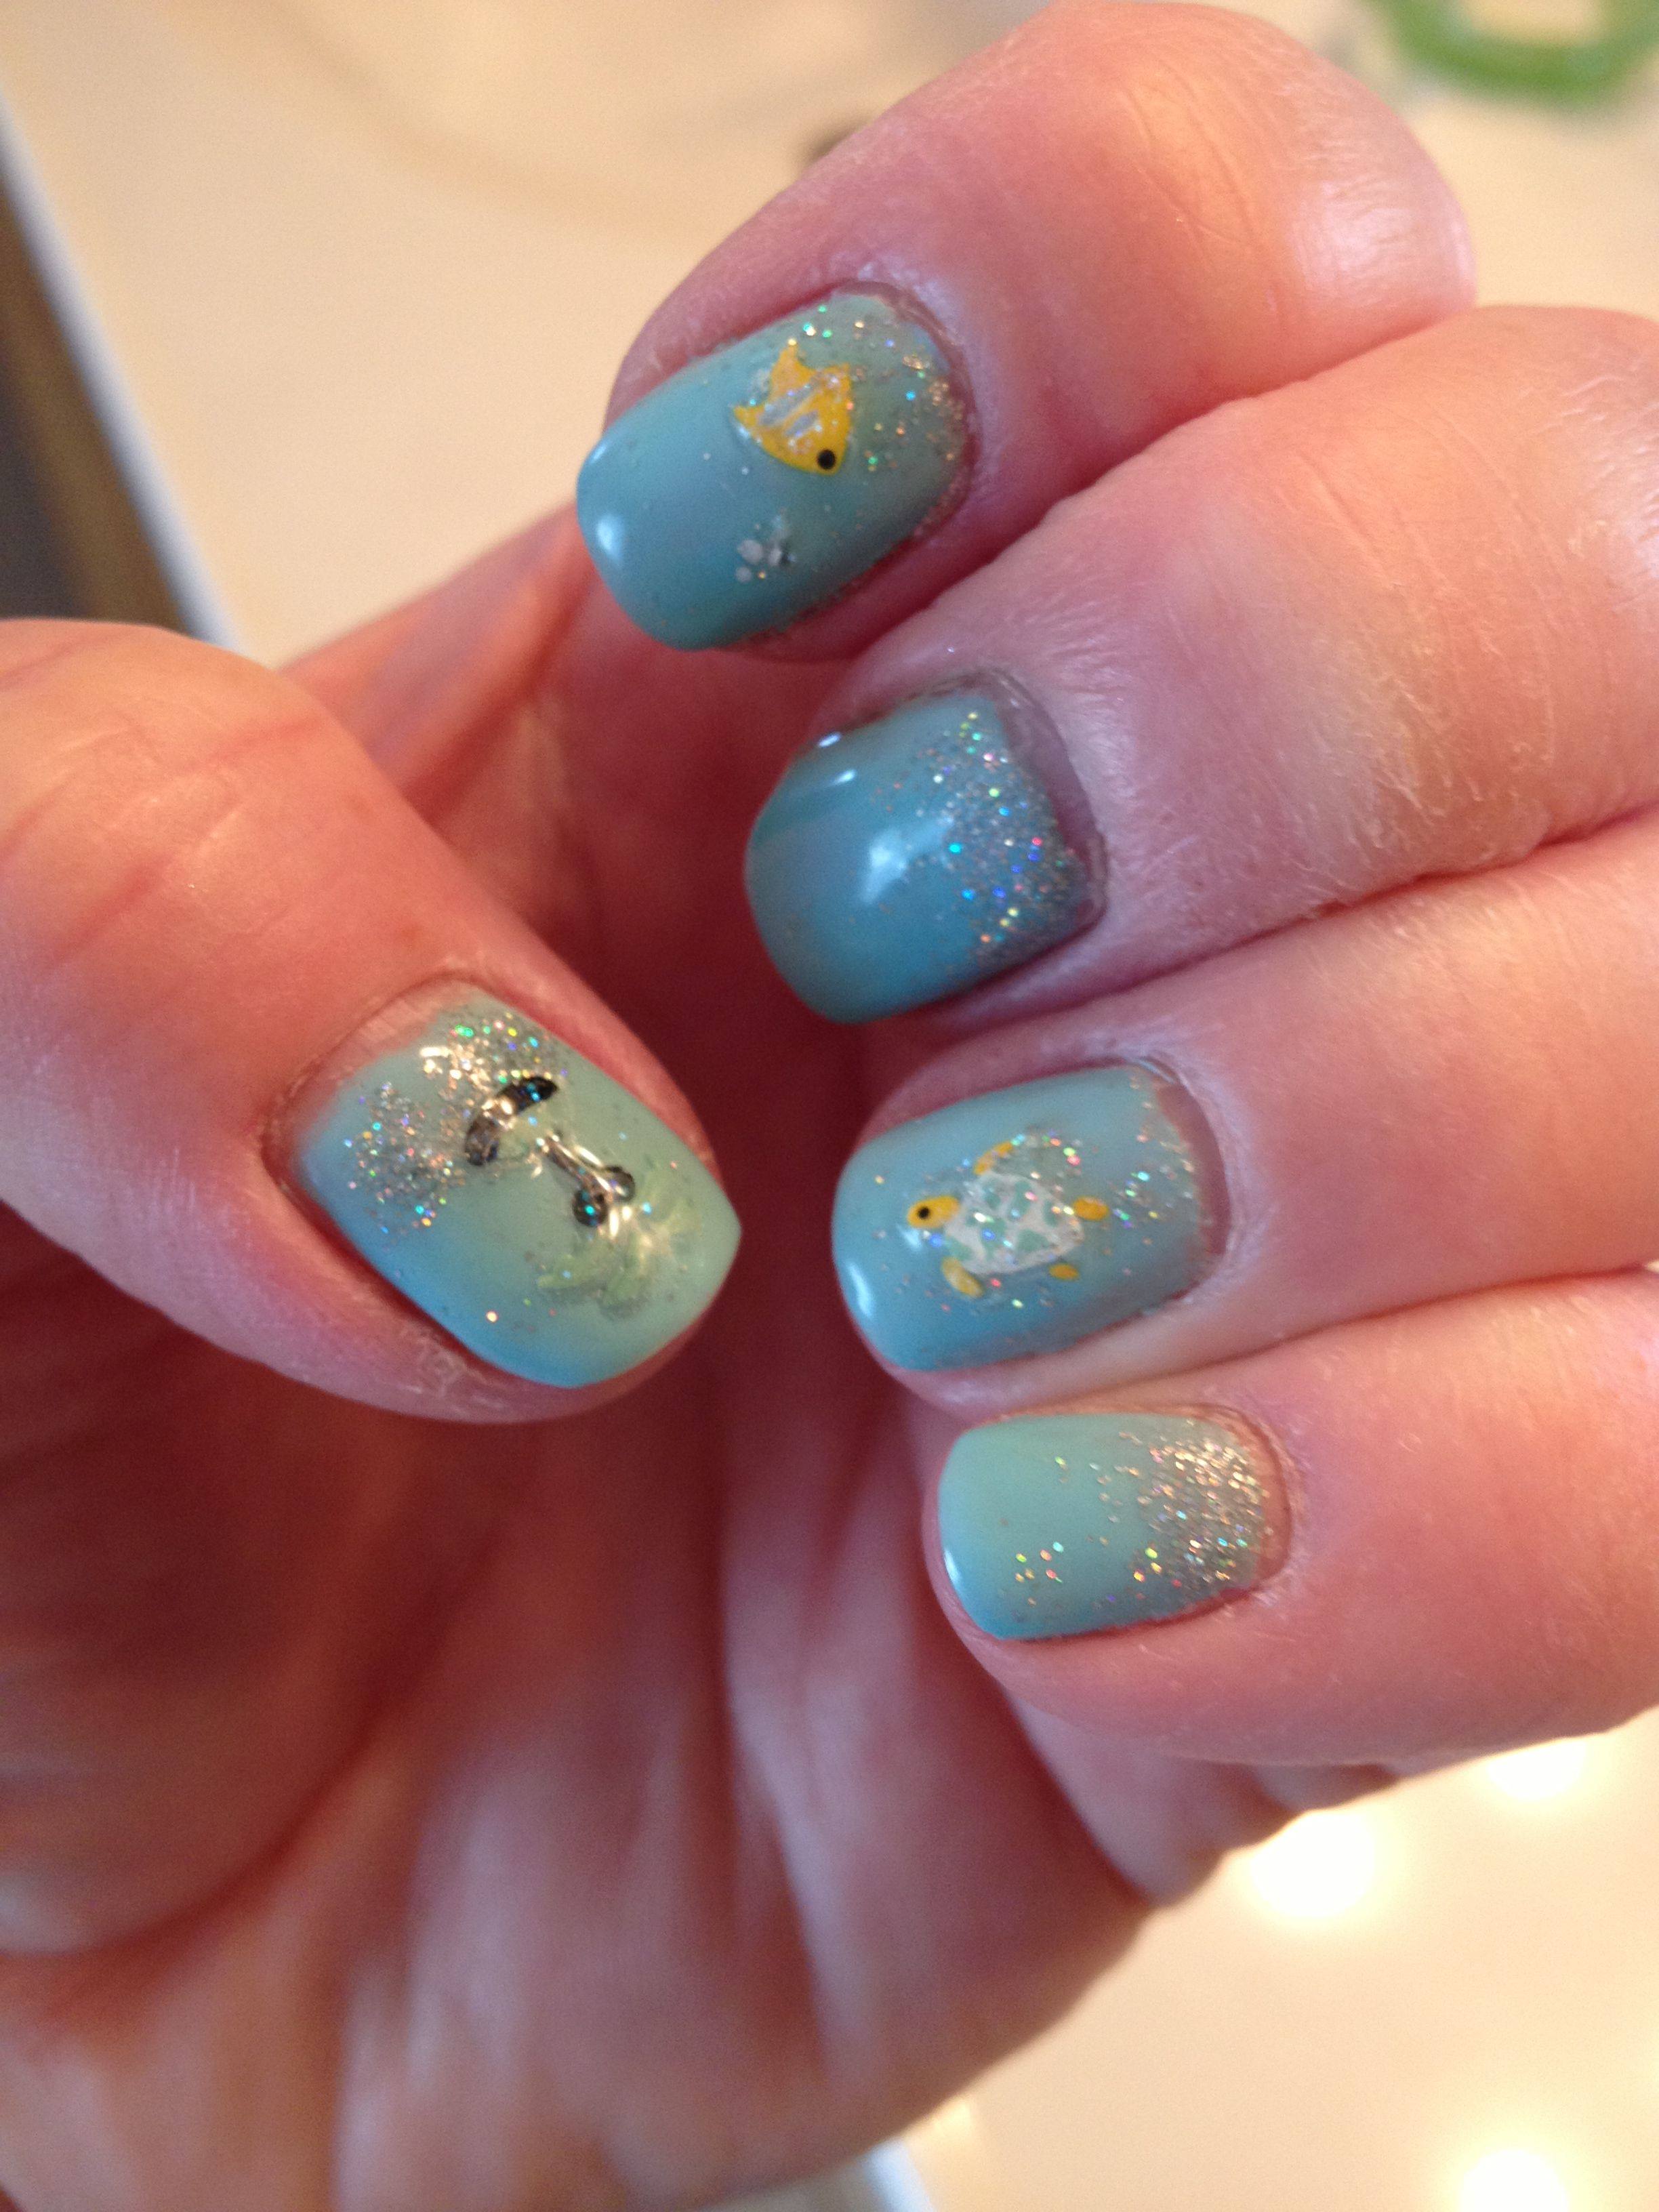 Gel polish with ocean decals and glitter